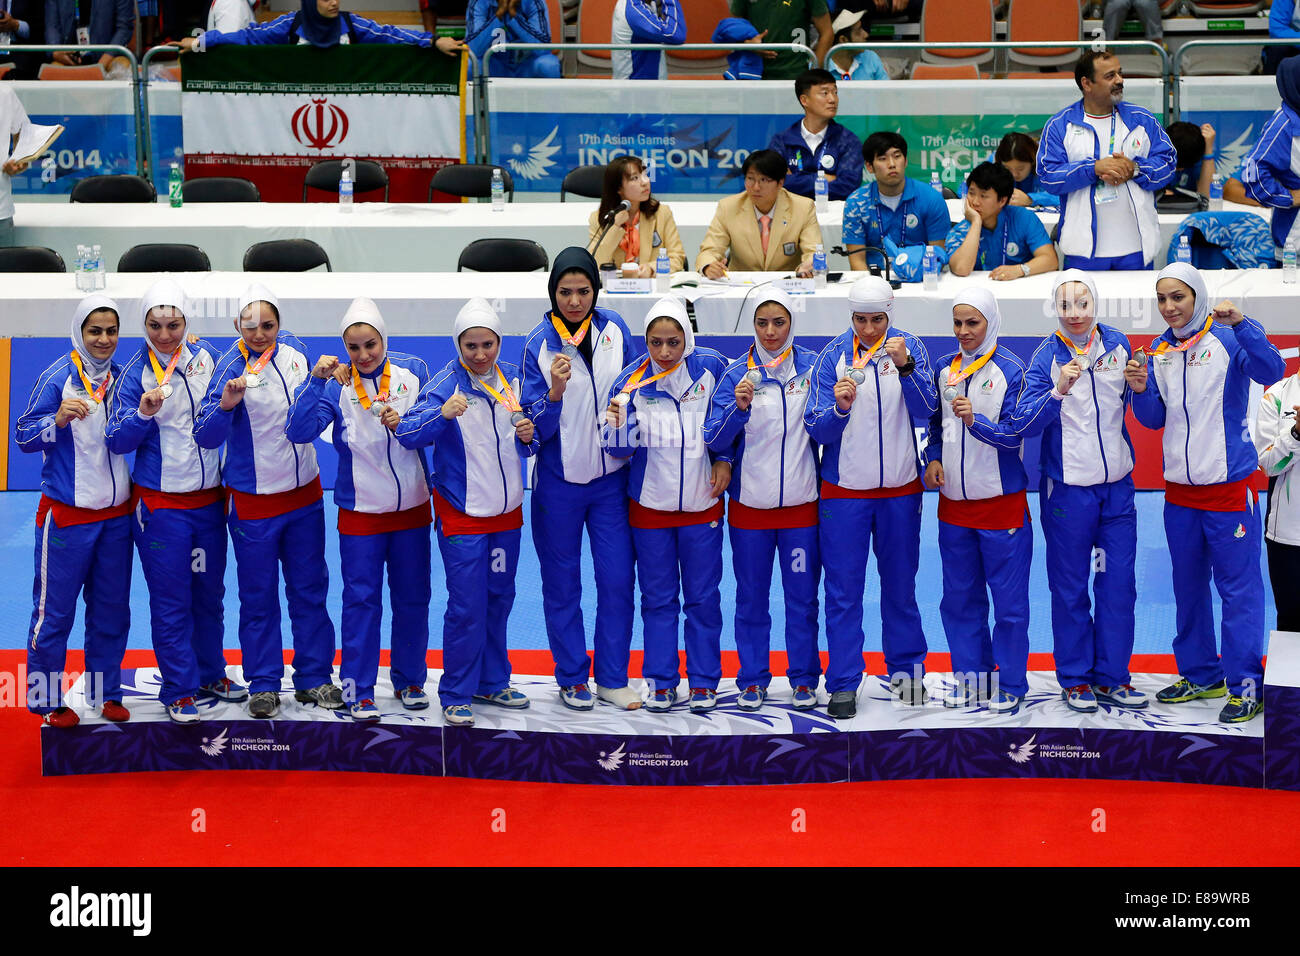 (141003) -- INCHEON, Oct. 3, 2014 (Xinhua) -- Silver medalists athletes of Iran pose on the podium during the awarding ceremony of the women's team match of kabaddi at the 17th Asian Games in Incheon, South Korea, Oct. 3, 2014. (Xinhua/Shen Bohan)(lz) Stock Photo